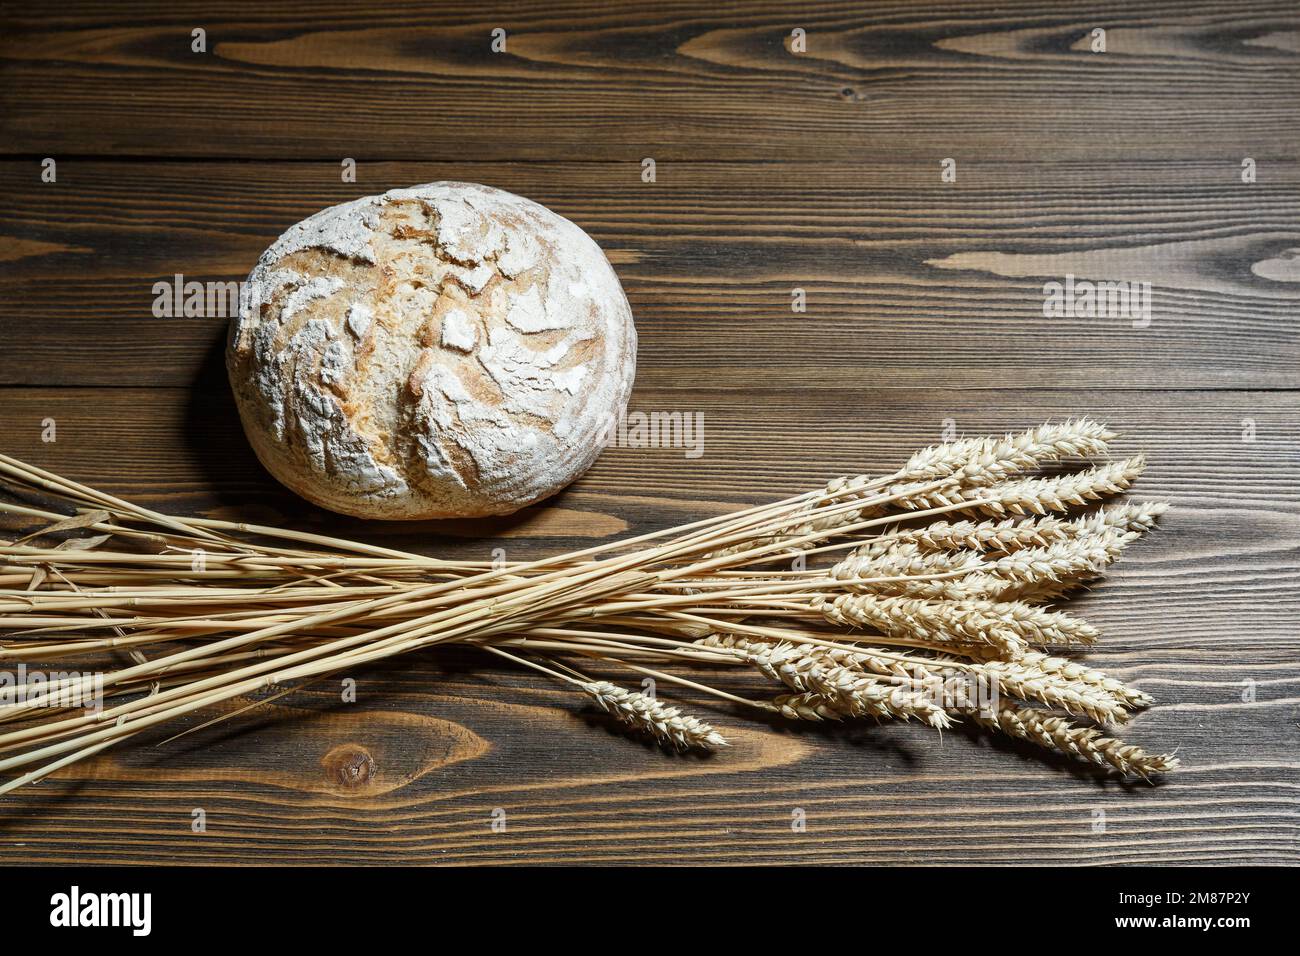 Fresh baked bread loaf and wheat ears lying on a wooden background. Food provision and production concept. Stock Photo